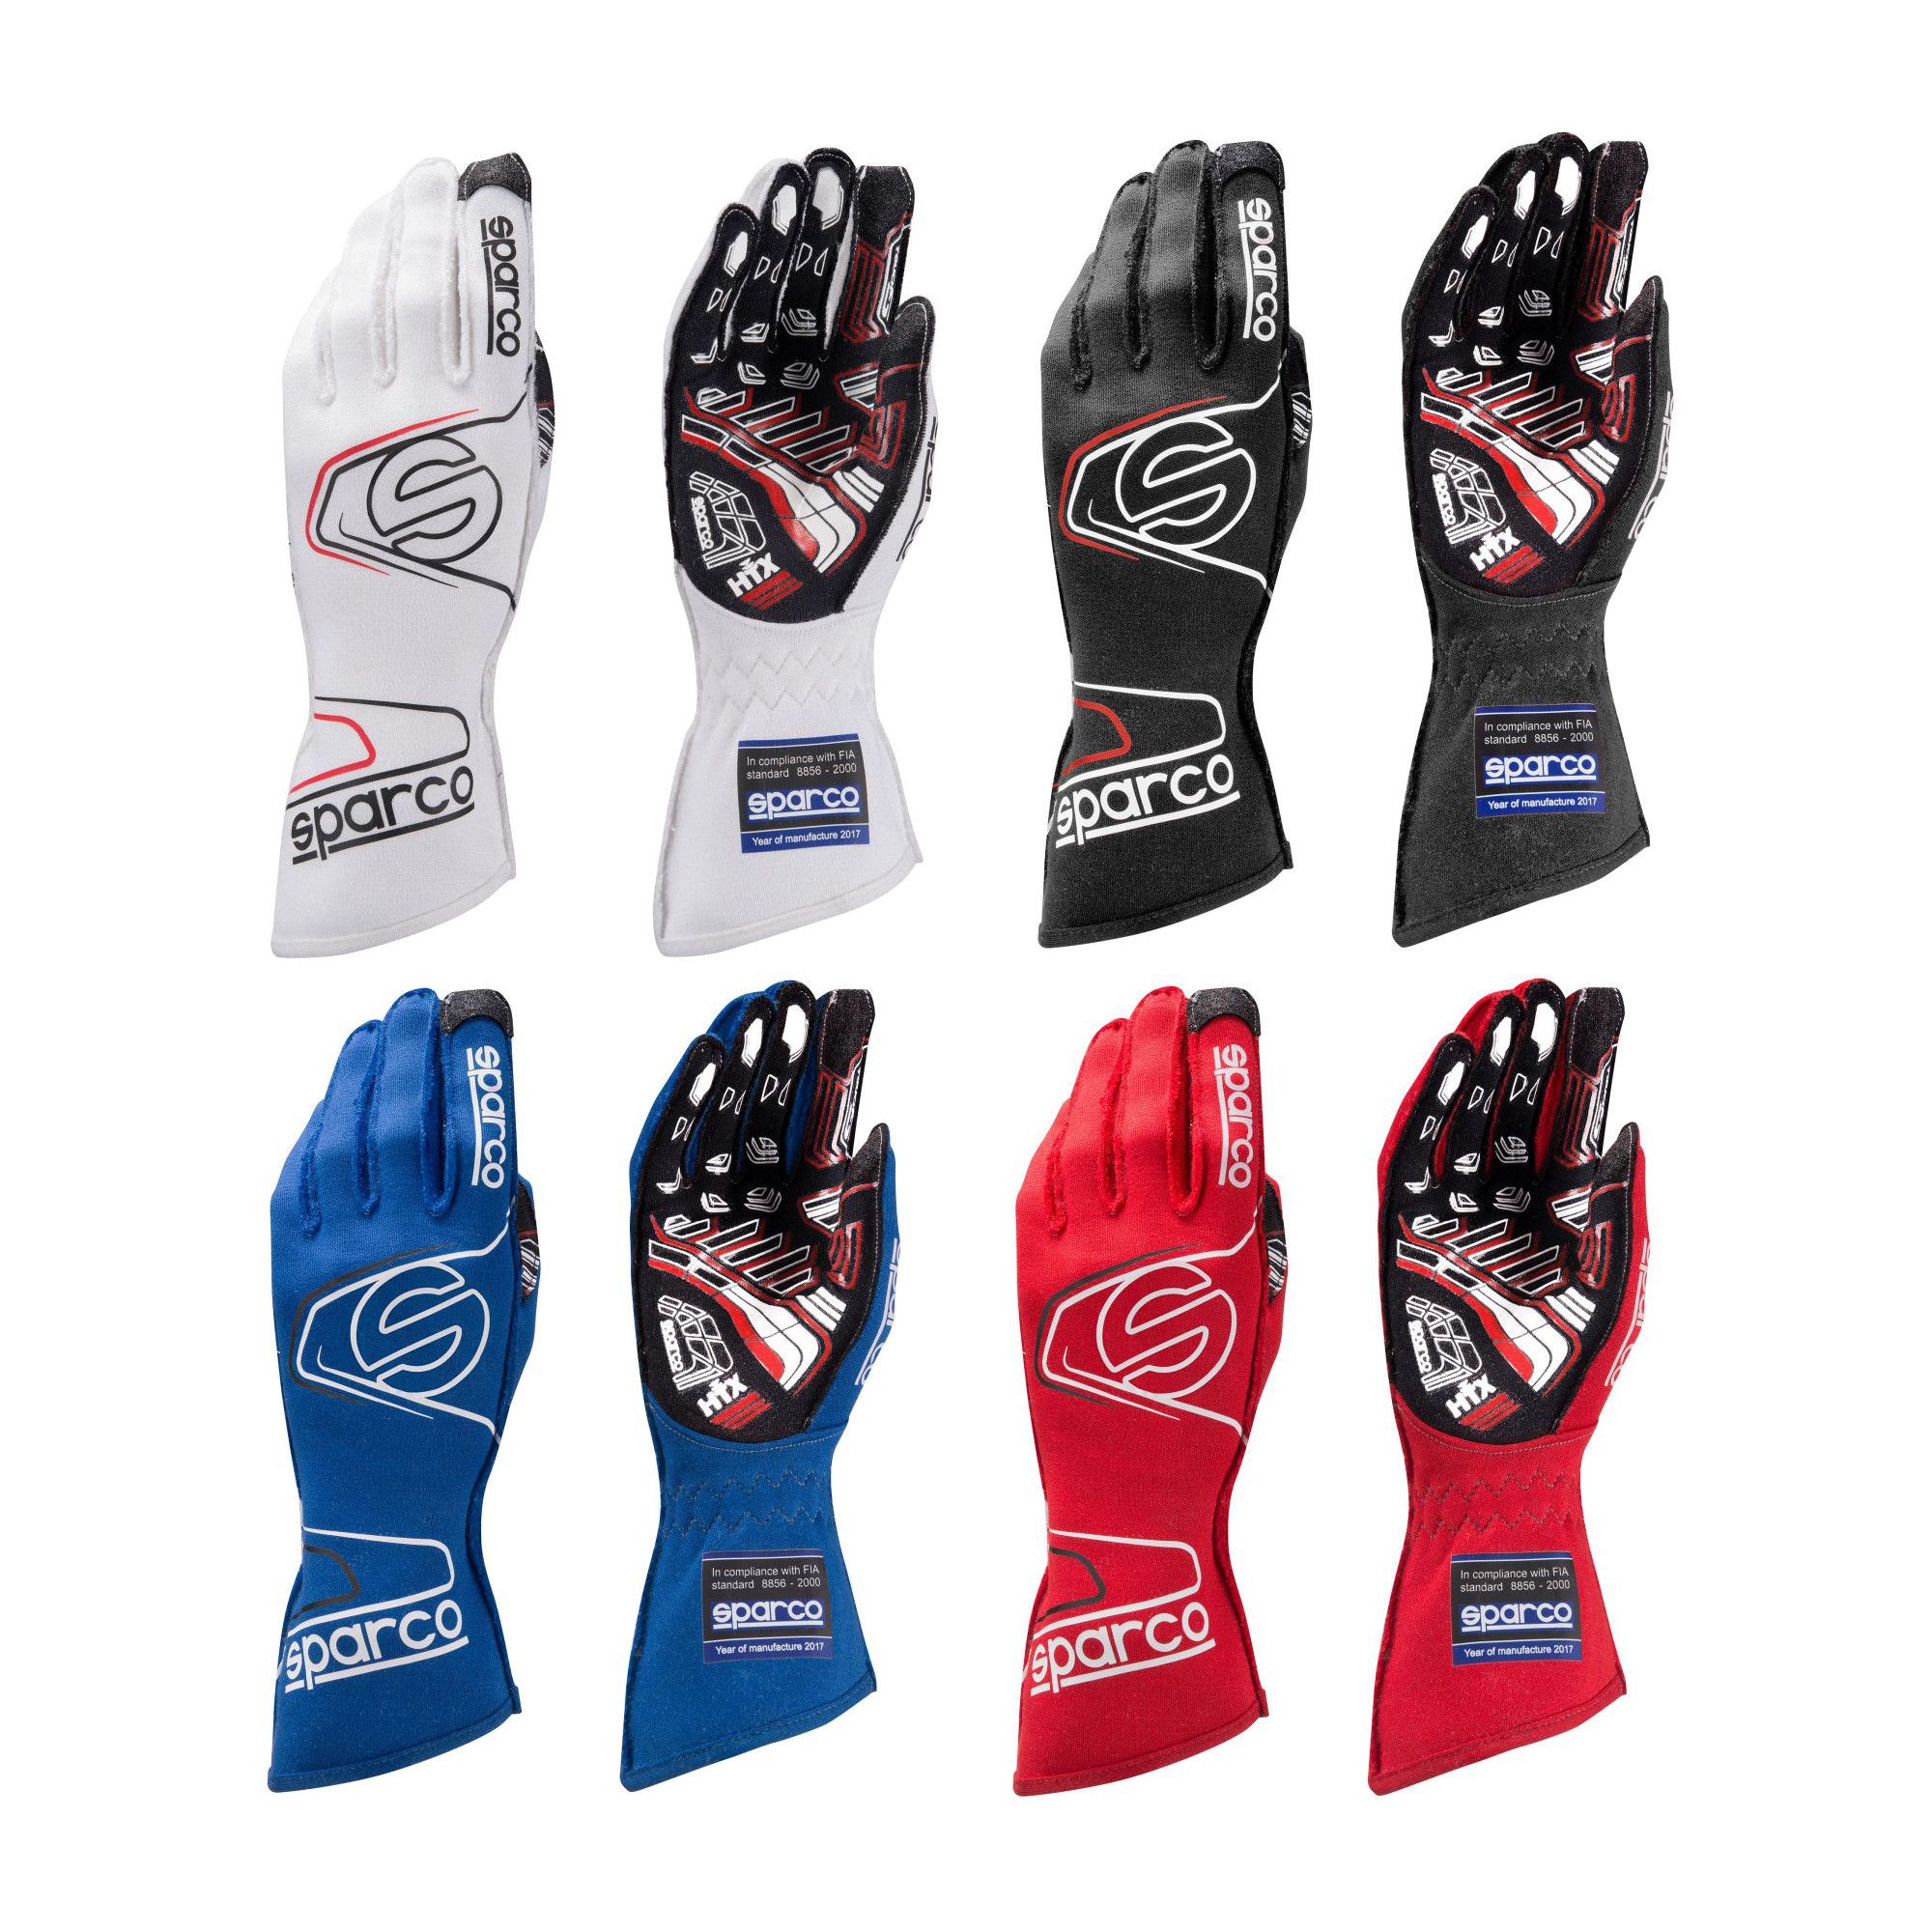 Sparco 002094NRRS08 Guantes Negro//rojo